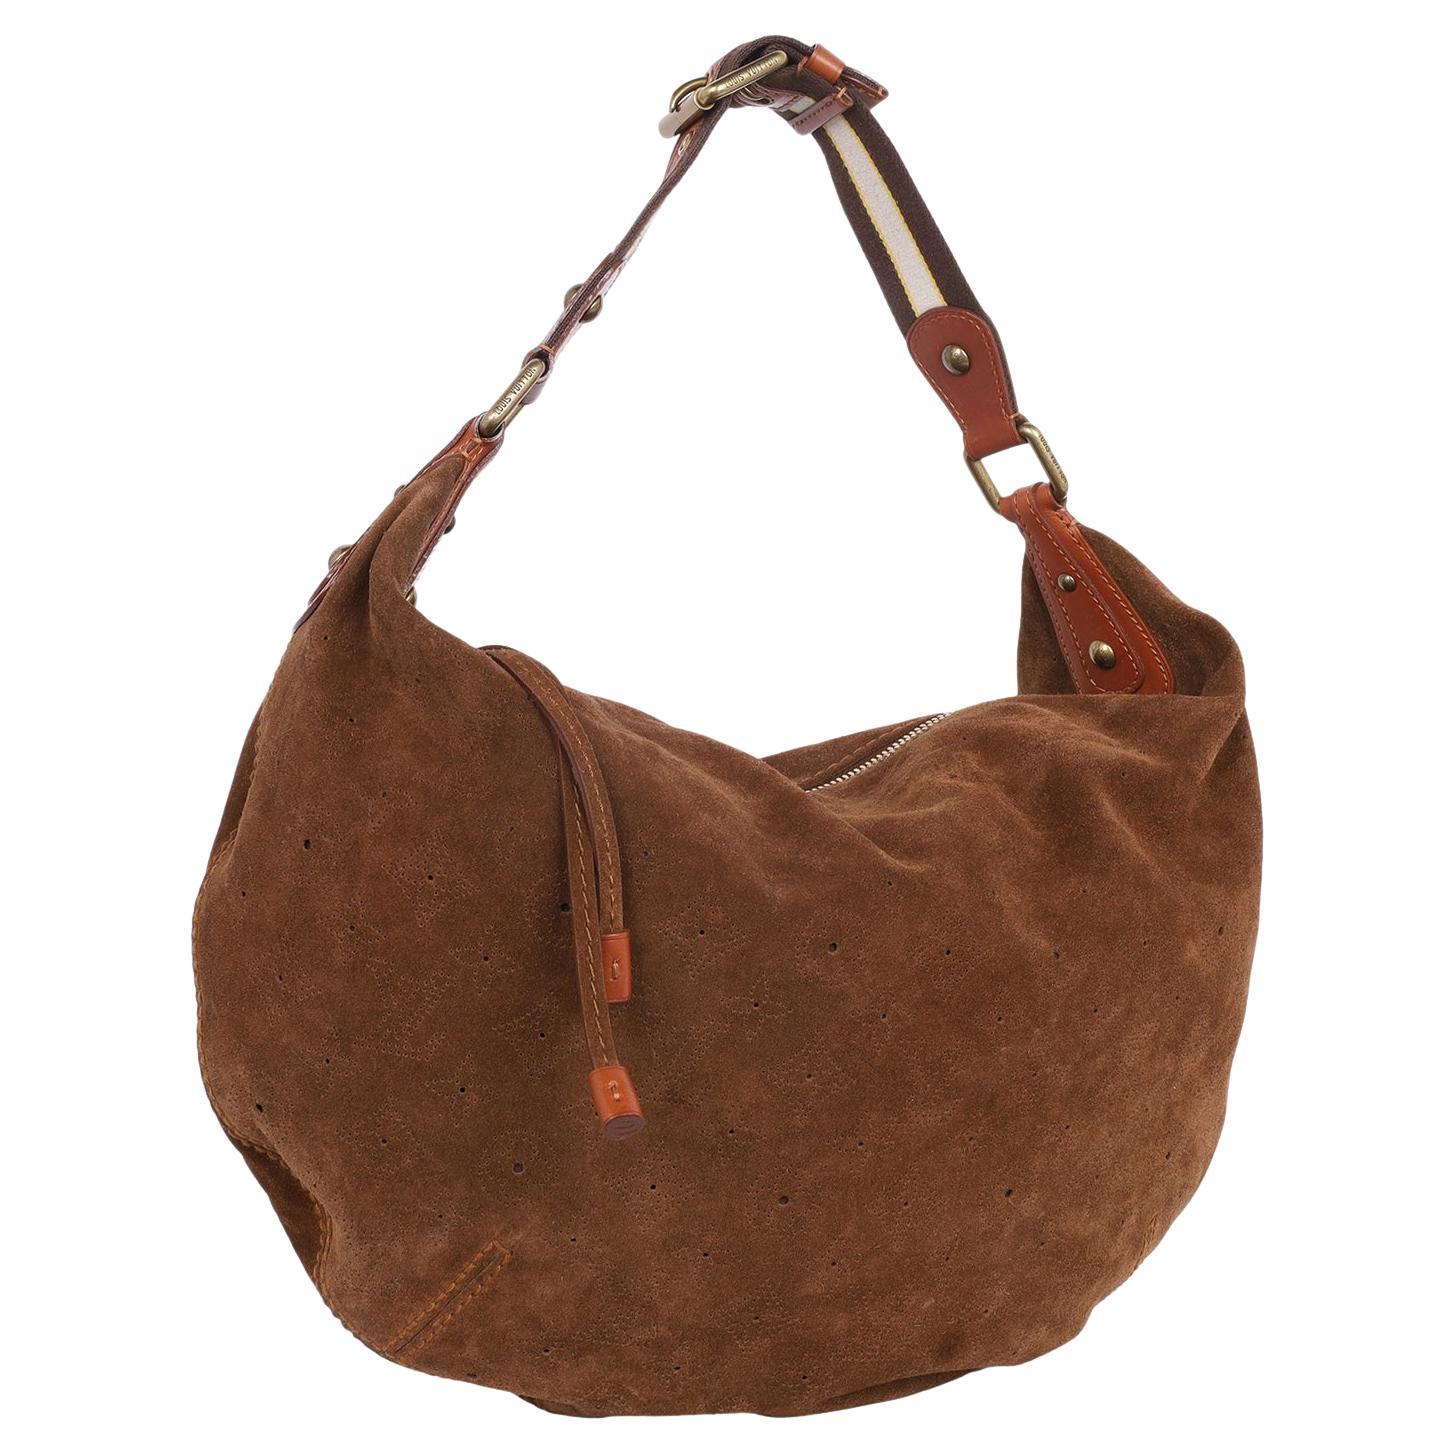 Authentic, pre loved Louis Vuitton Suede Mahina Onatah hobo croissant Bag. Features brown suede and monogram that is finely perforated across the bag, looping striped shoulder strap of canvas, cowhide leather and polished brass, zipper top closure.